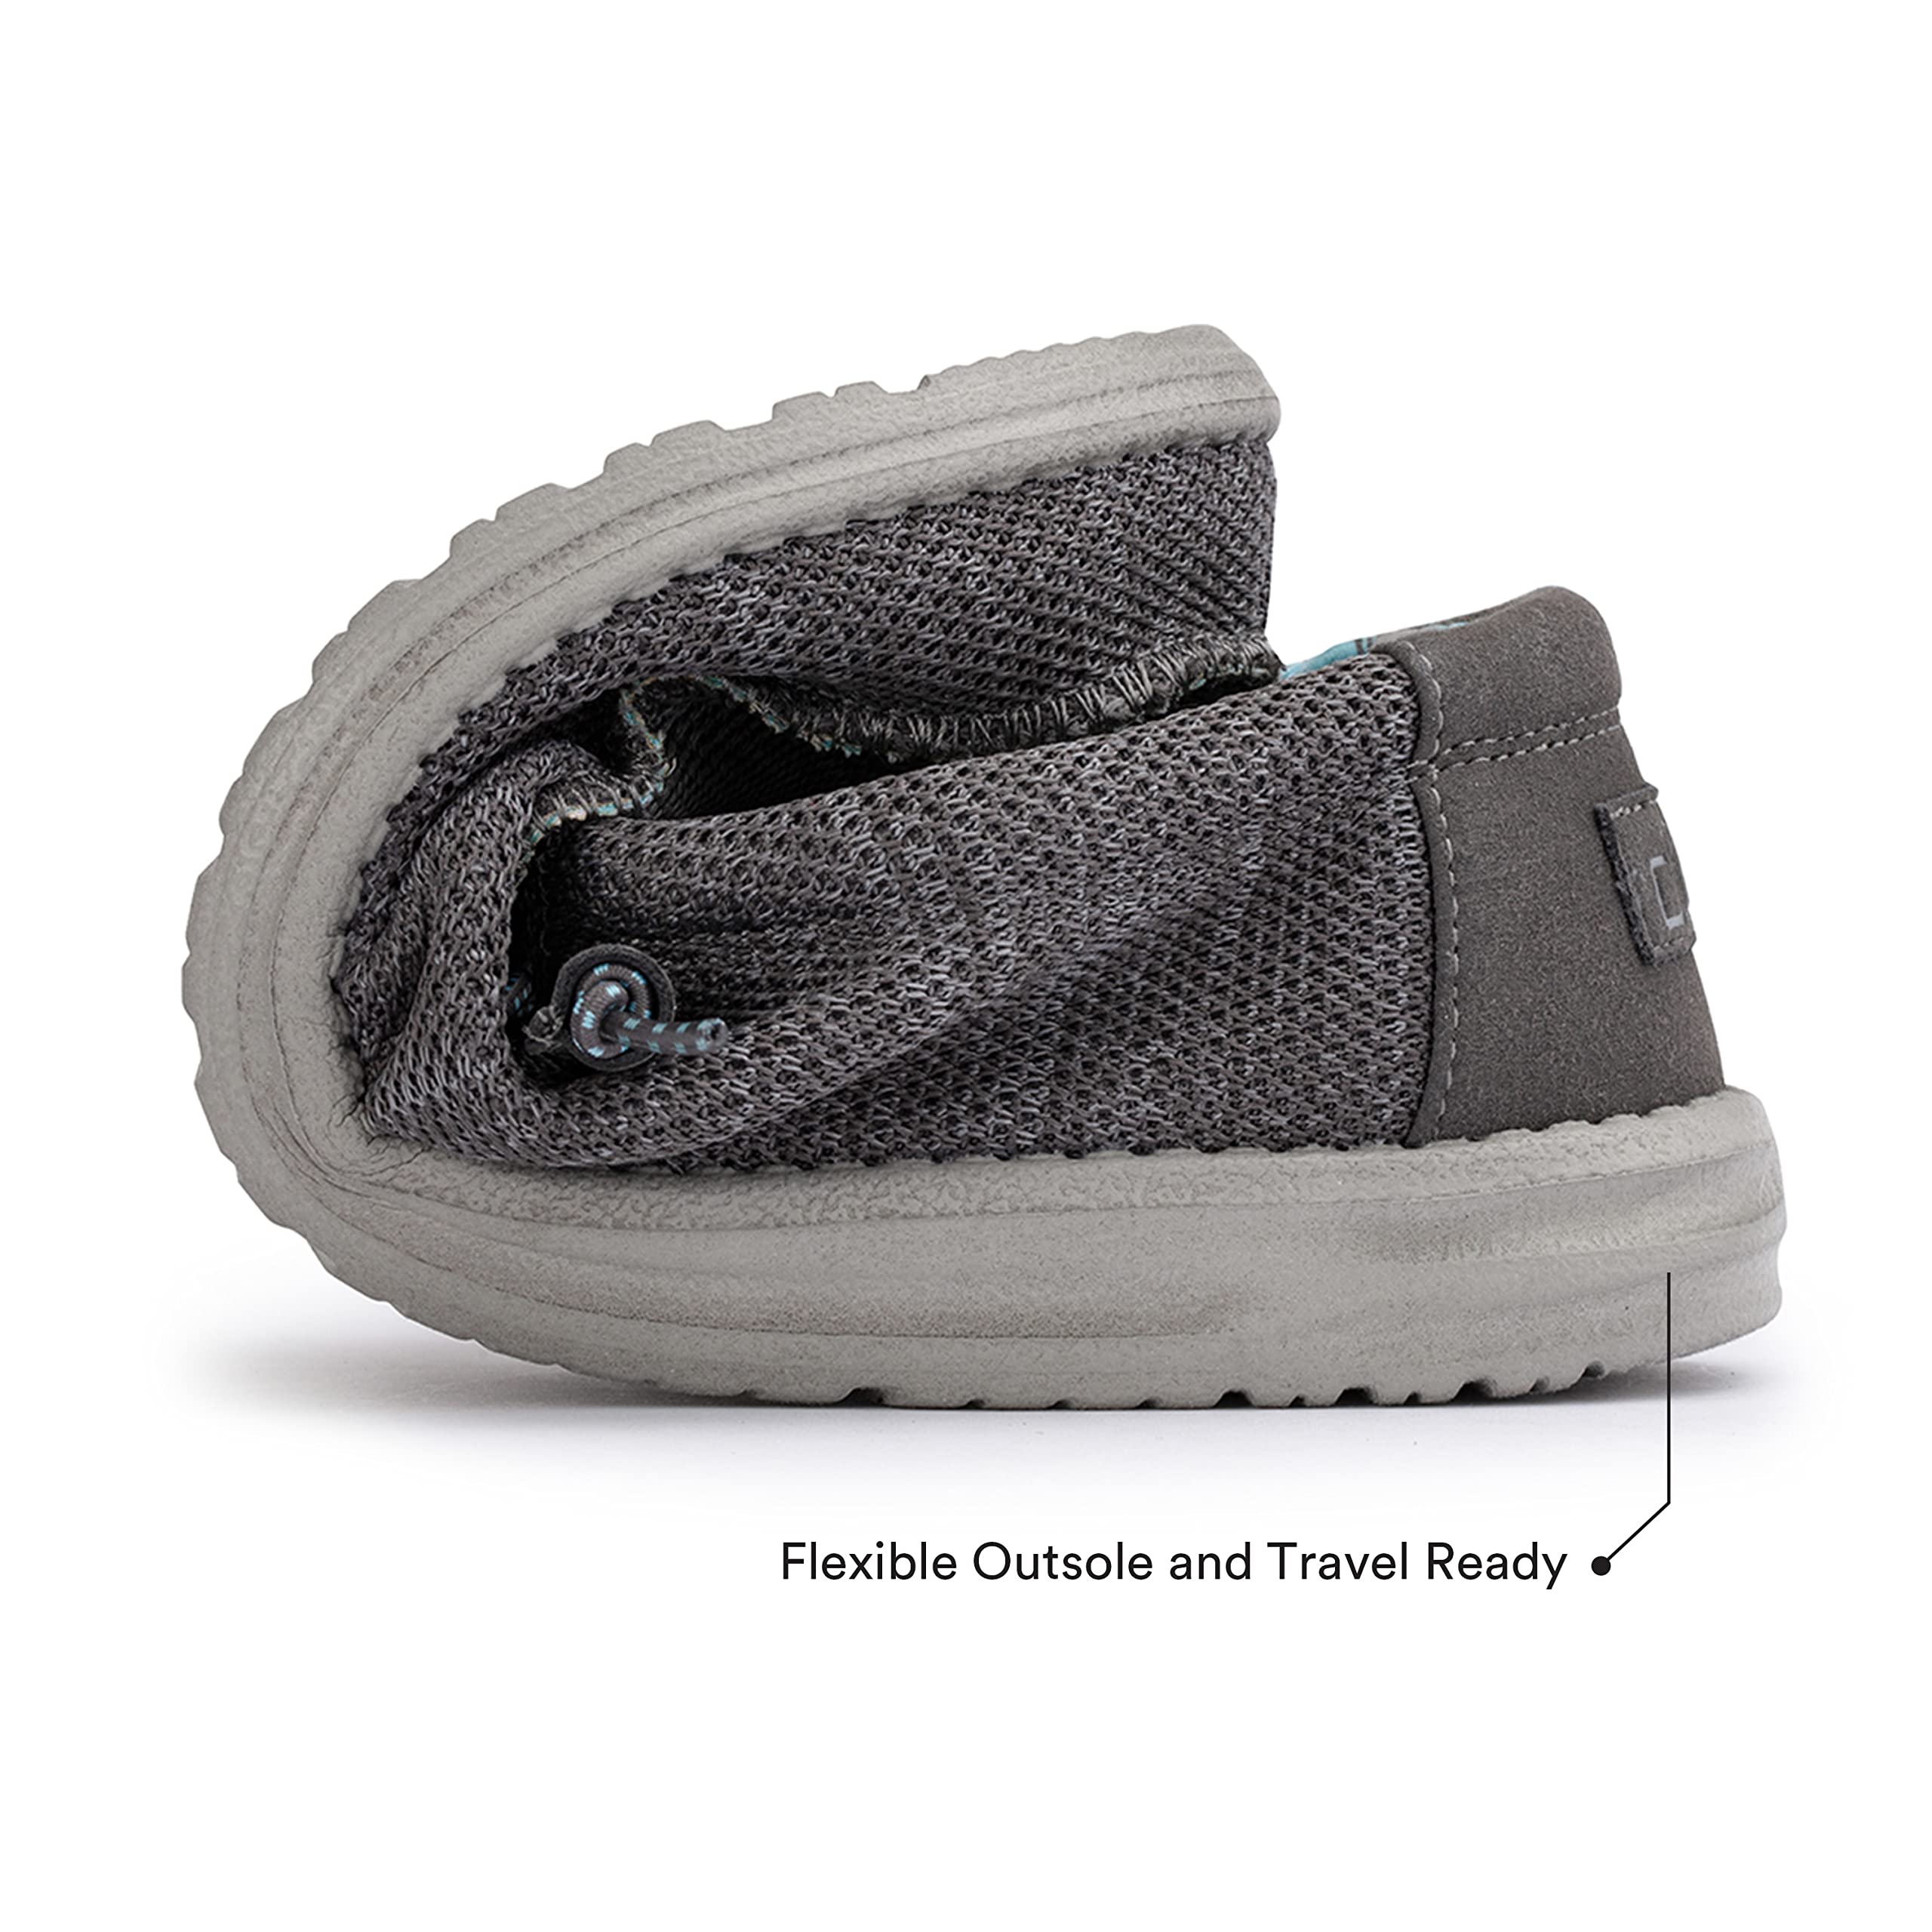 Hey Dude Men's Wally Sox | Men's Loafers | Men's Slip On Shoes | Comfortable & Light-Weight